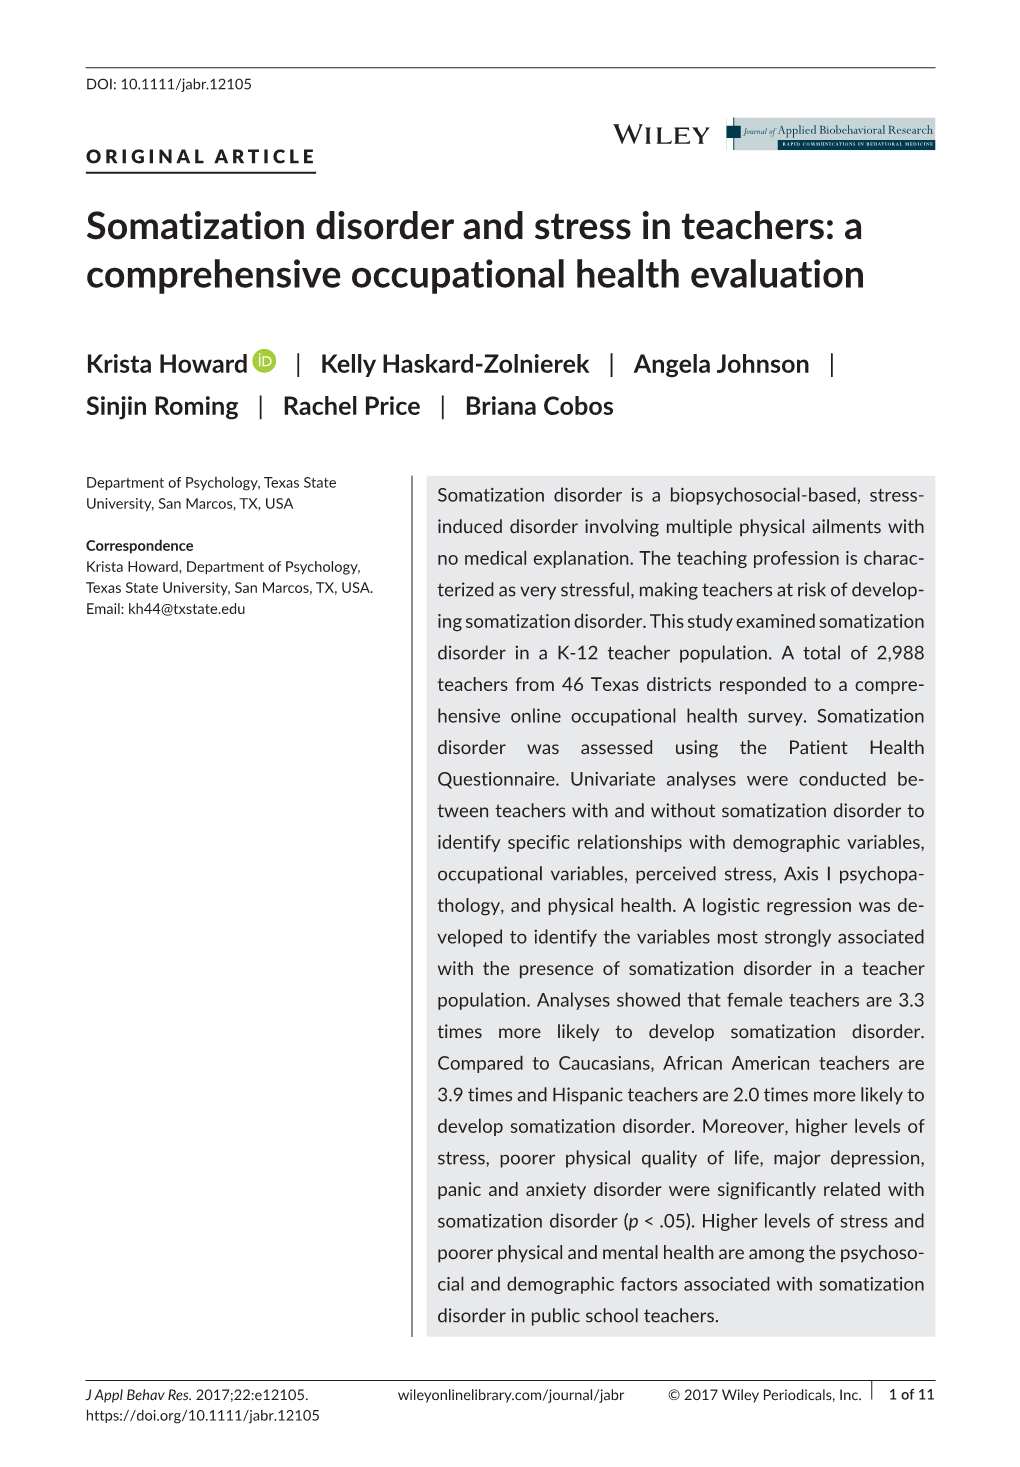 Somatization Disorder and Stress in Teachers: a Comprehensive Occupational Health Evaluation